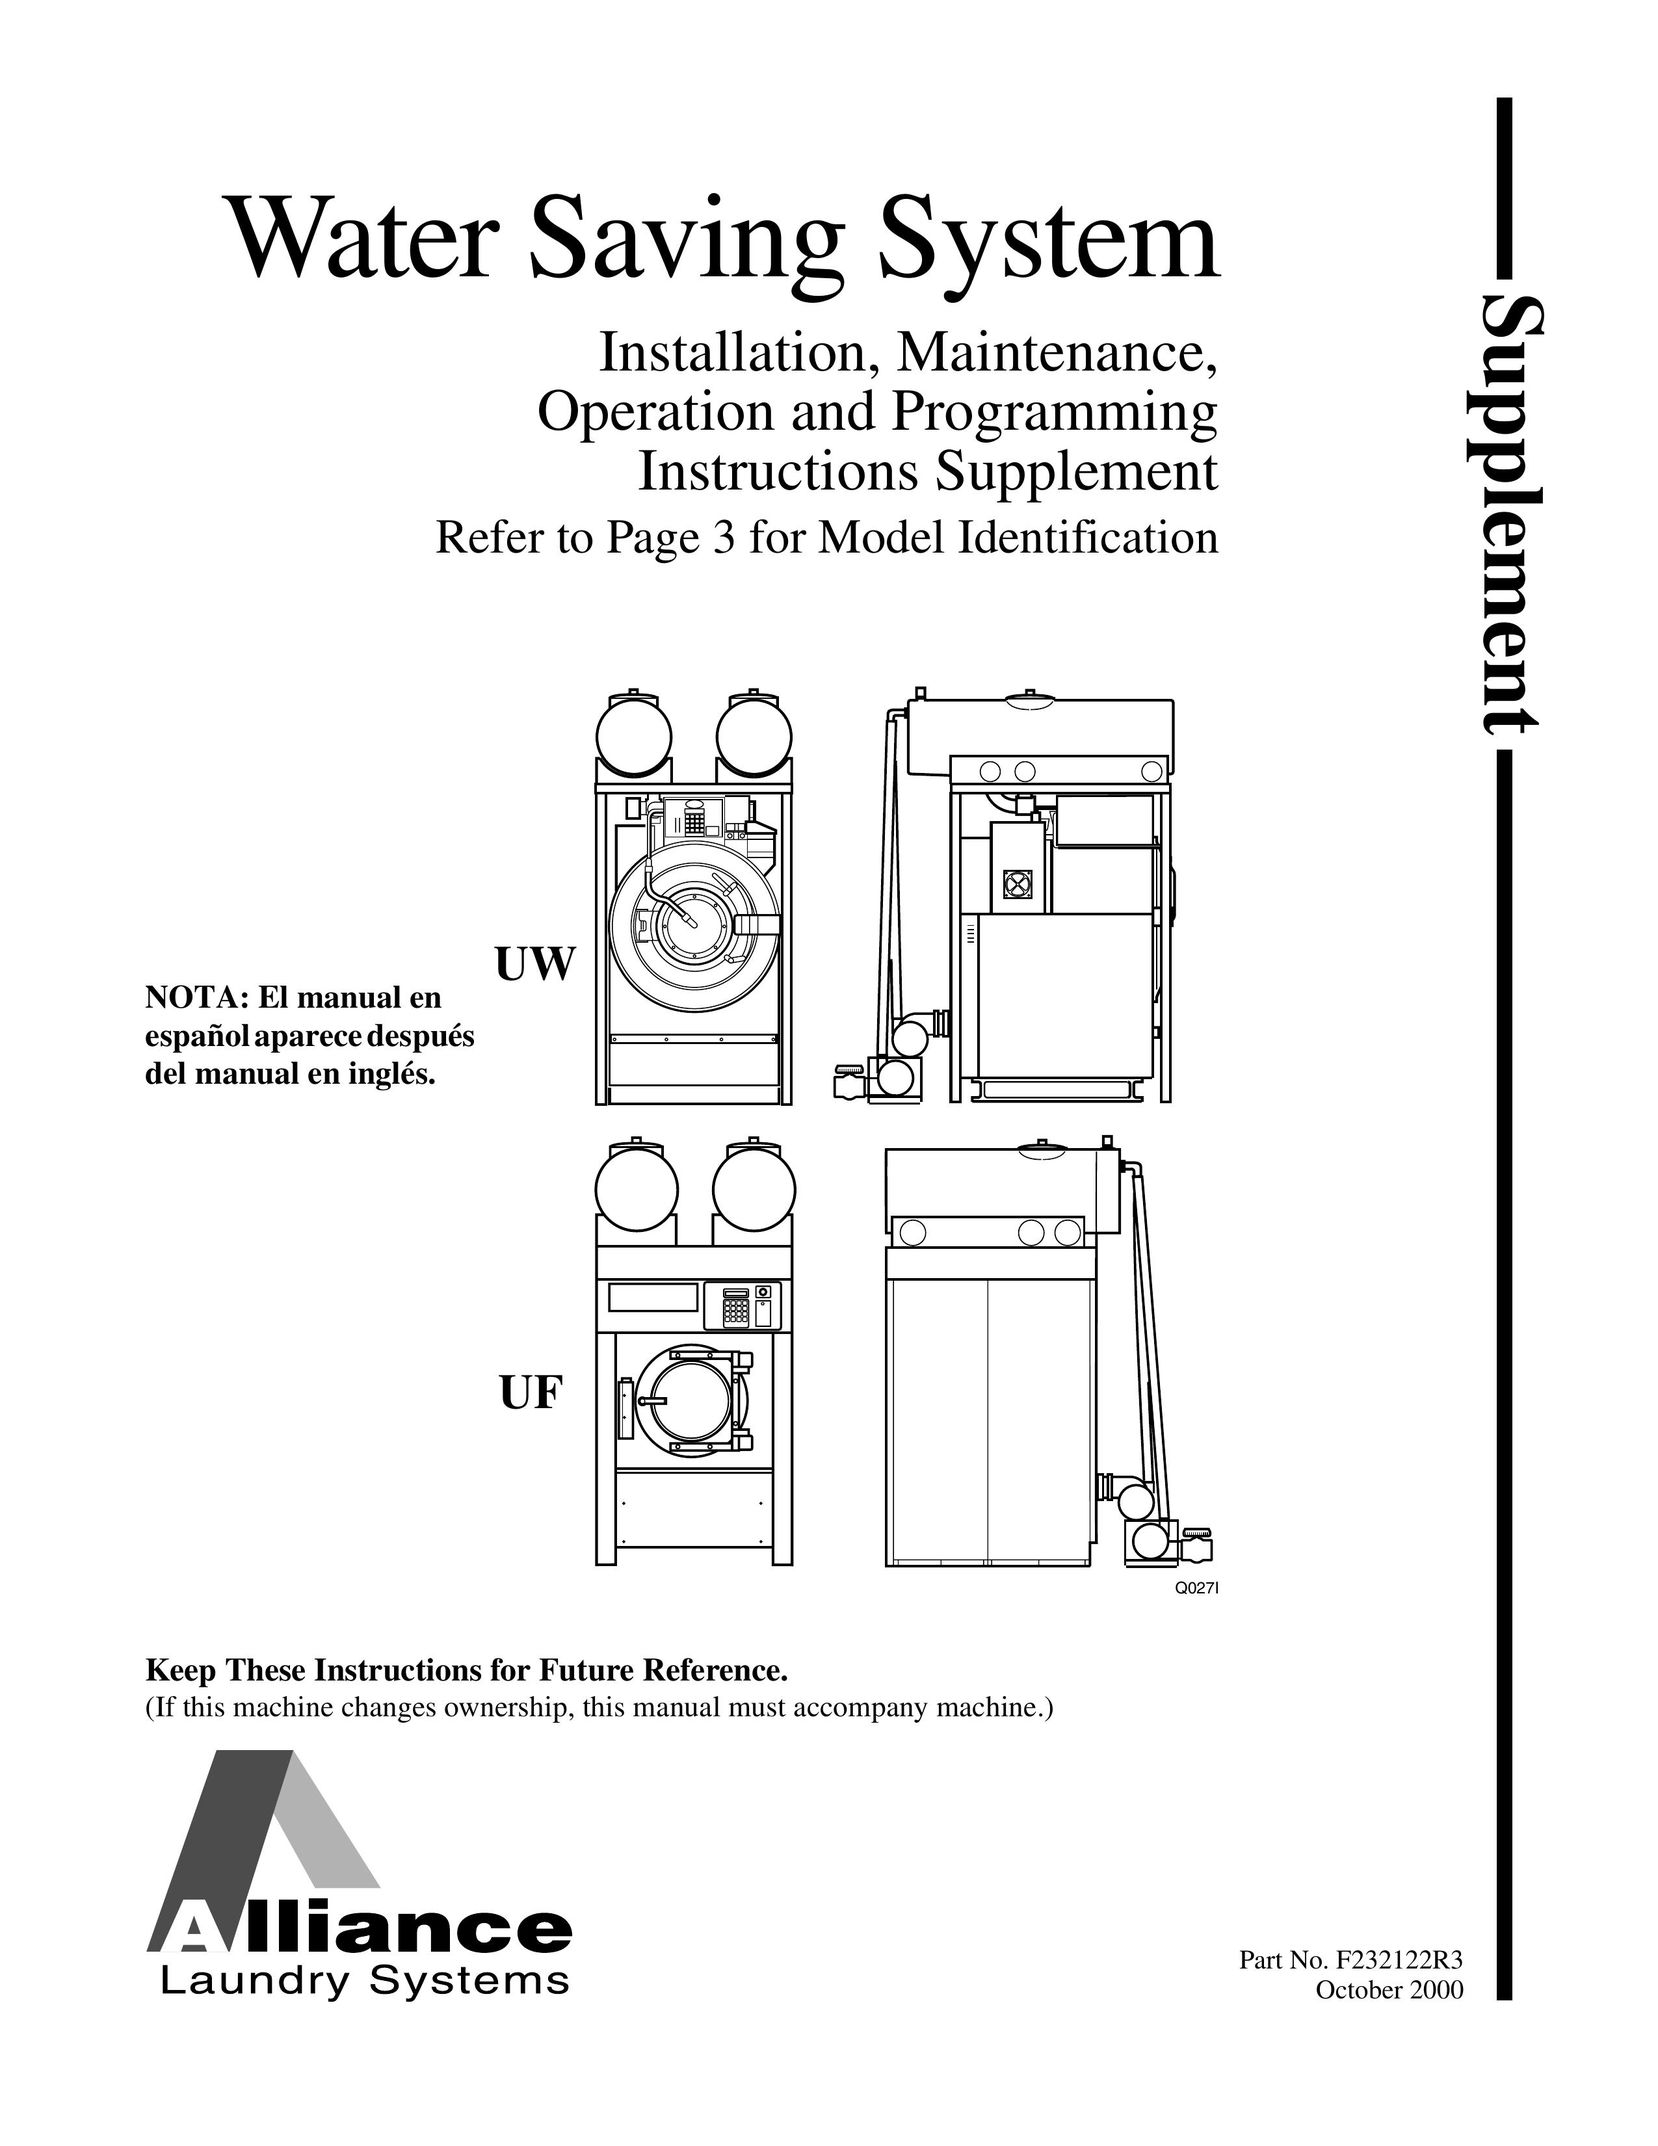 Alliance Laundry Systems F232122R3 Water System User Manual